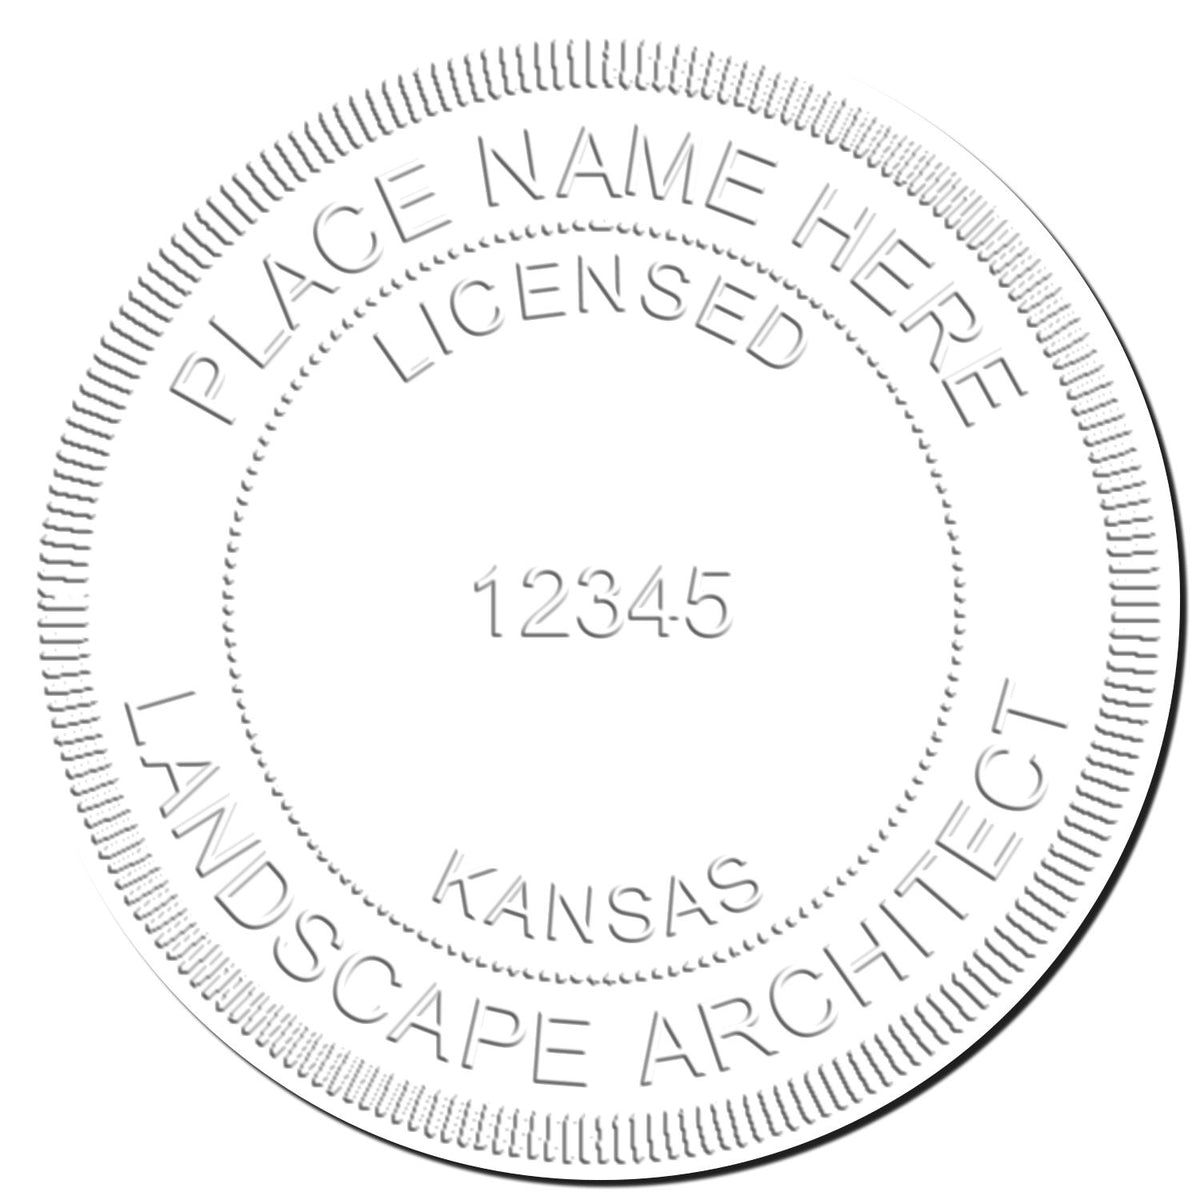 This paper is stamped with a sample imprint of the Soft Pocket Kansas Landscape Architect Embosser, signifying its quality and reliability.